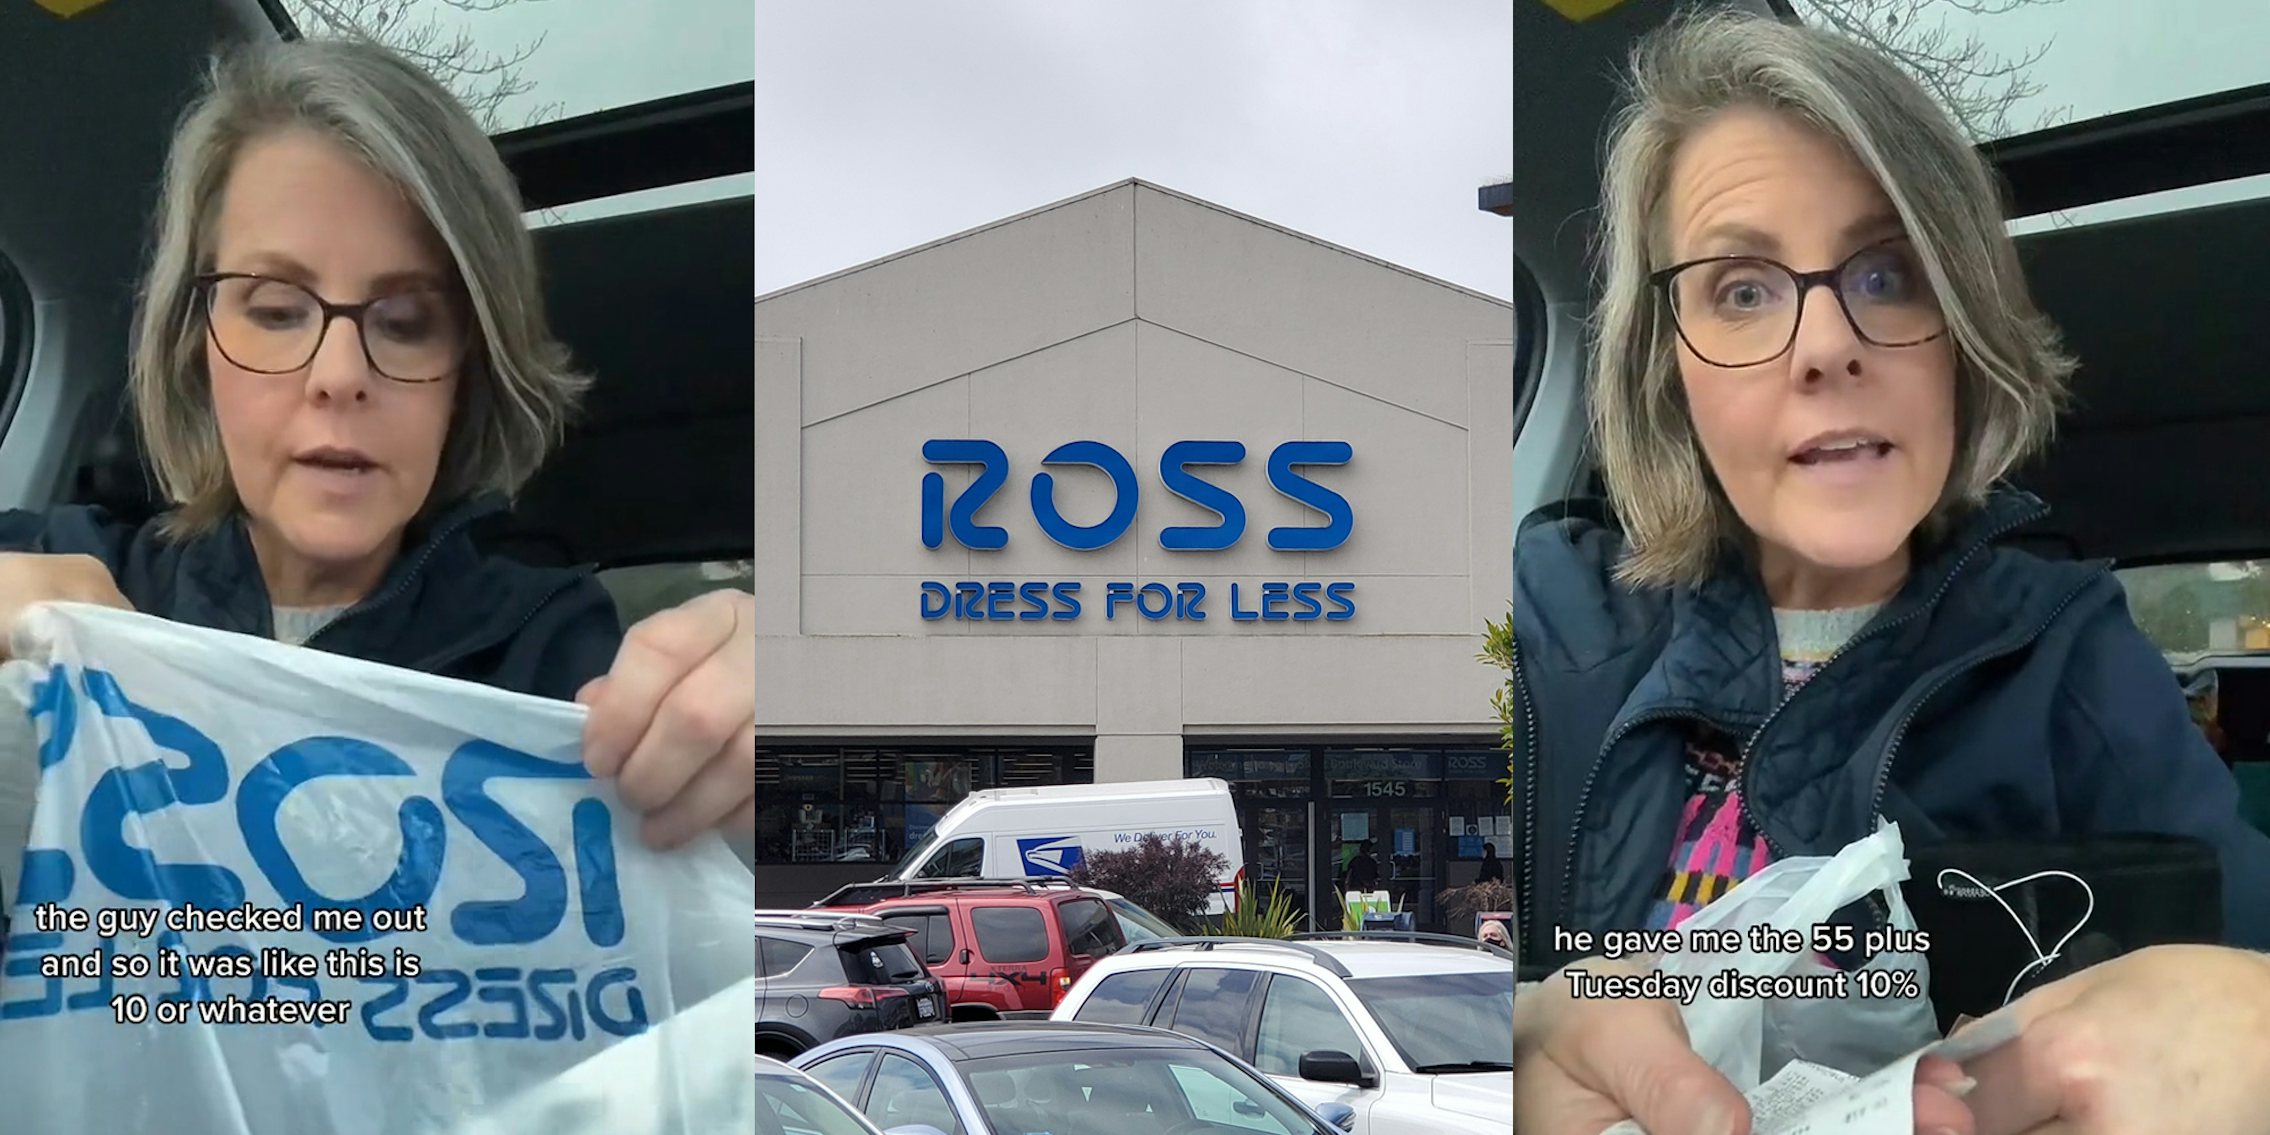 woman speaking in car holding Ross Dress For Less bag caption 'the guy checked me out and so it was like this is 10 or whatever' (l) Ross Dress Fir Less sign on building with parking lot (c) woman speaking in car holing bag caption 'he gave me the 55 plus Tuesday discount 10%' (r)